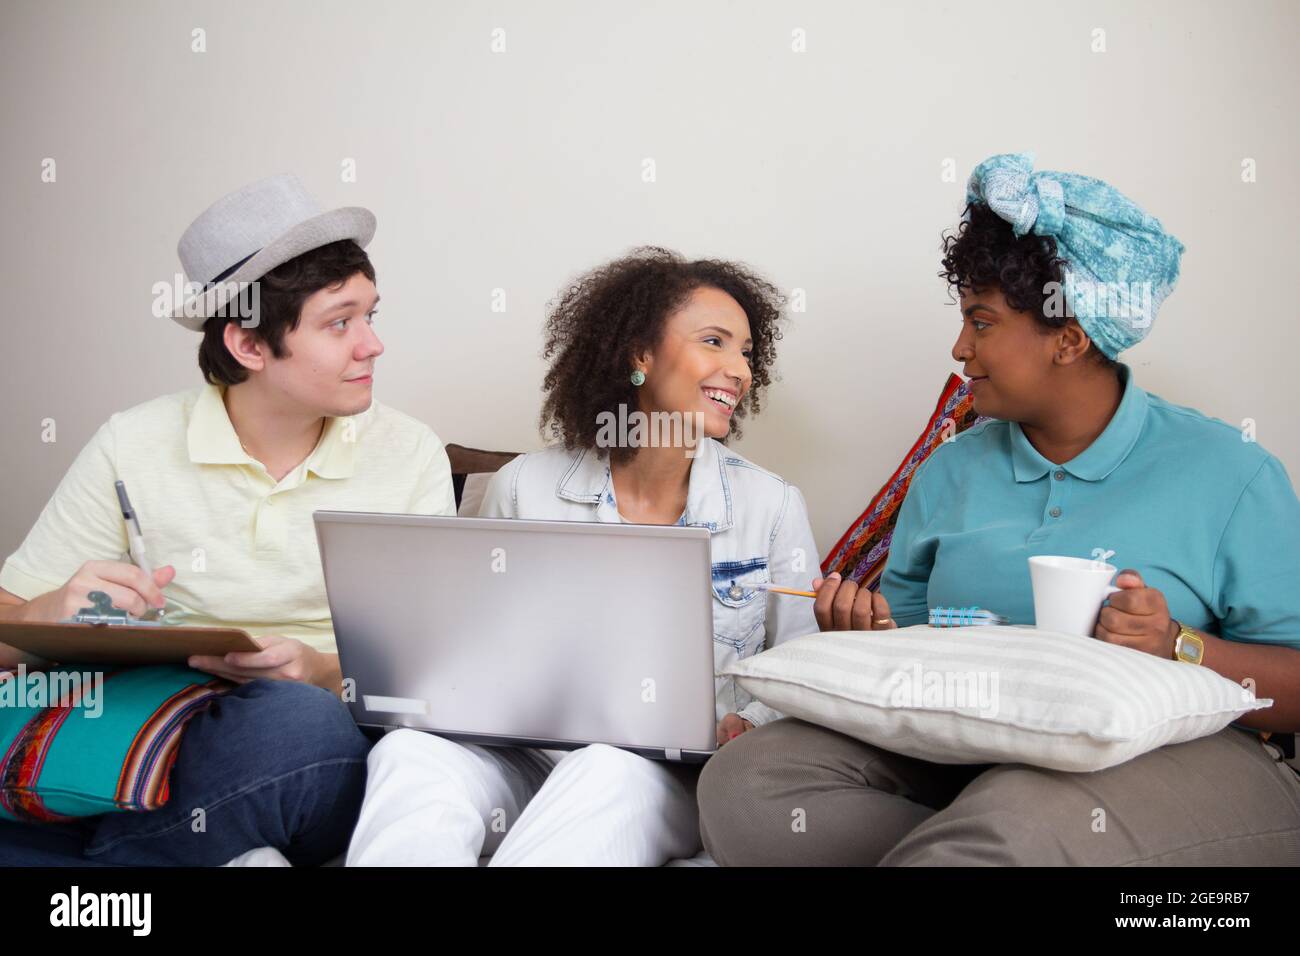 Multiethnic university rommates helping each other with studies work. Group study for effective communication, teamwork and togetherness. Stock Photo